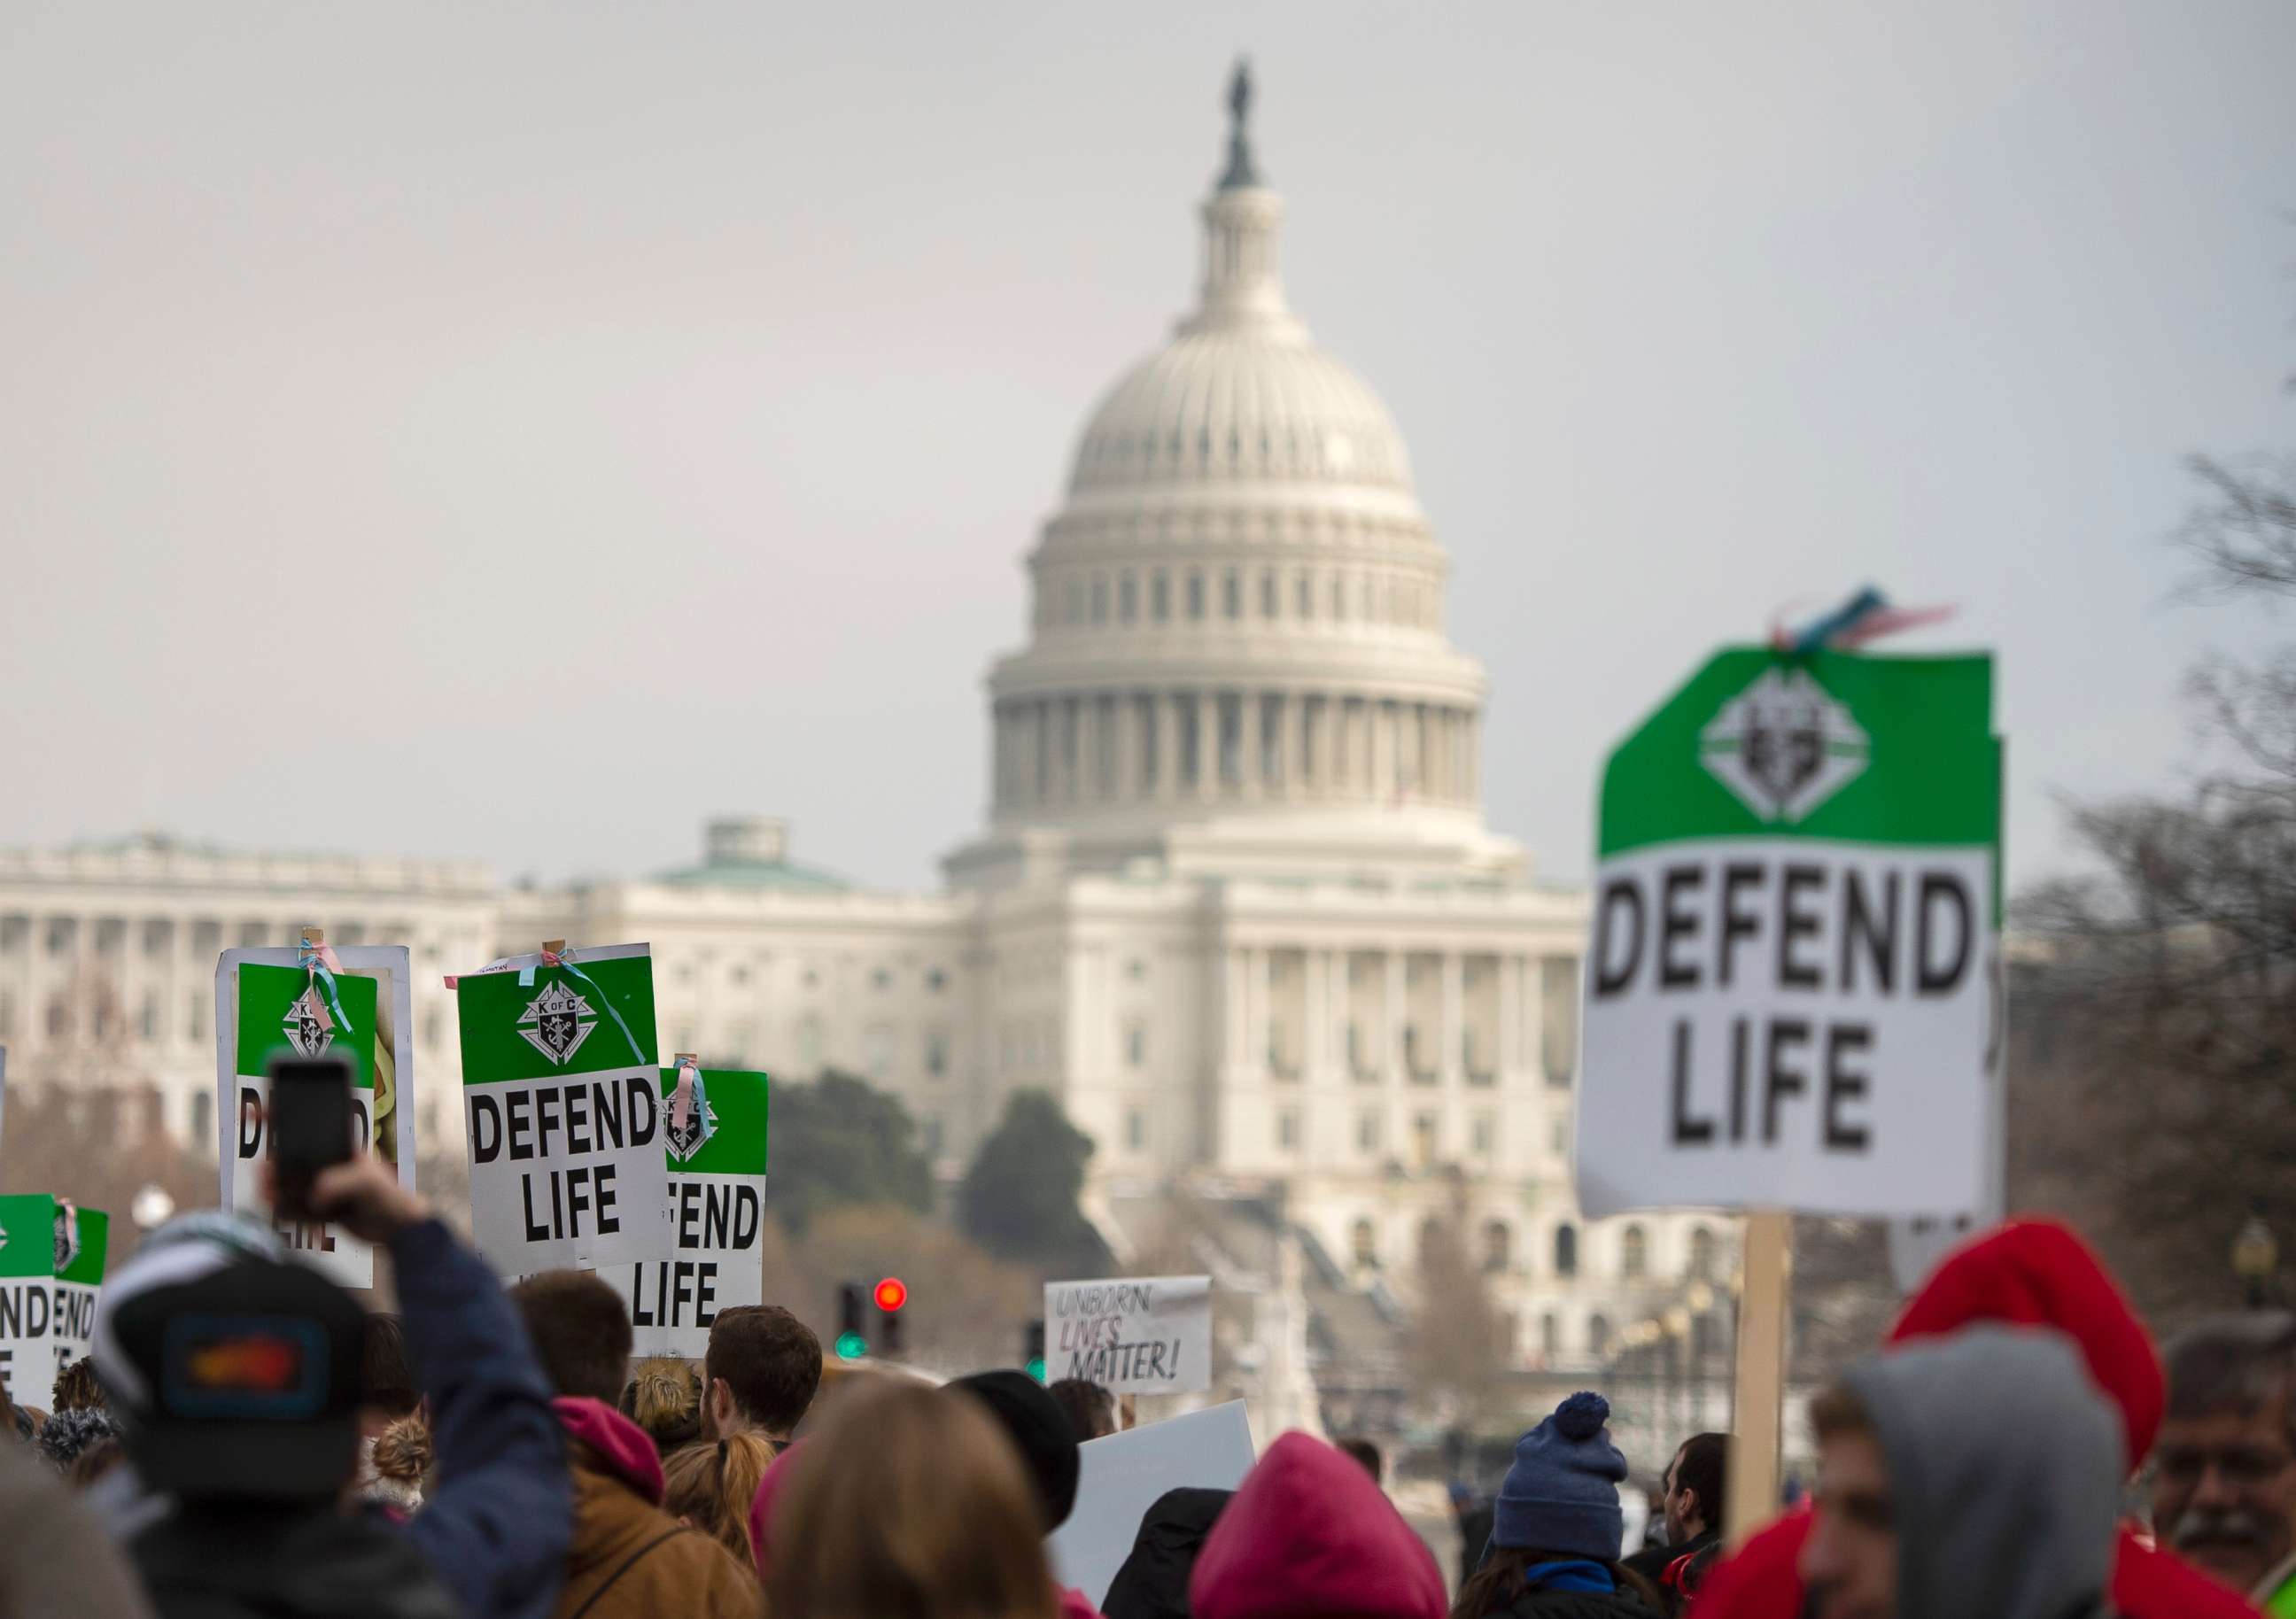 PHOTO: Students and activists carry signs during the annual "March for Life" in Washington, DC, Jan. 18, 2019.